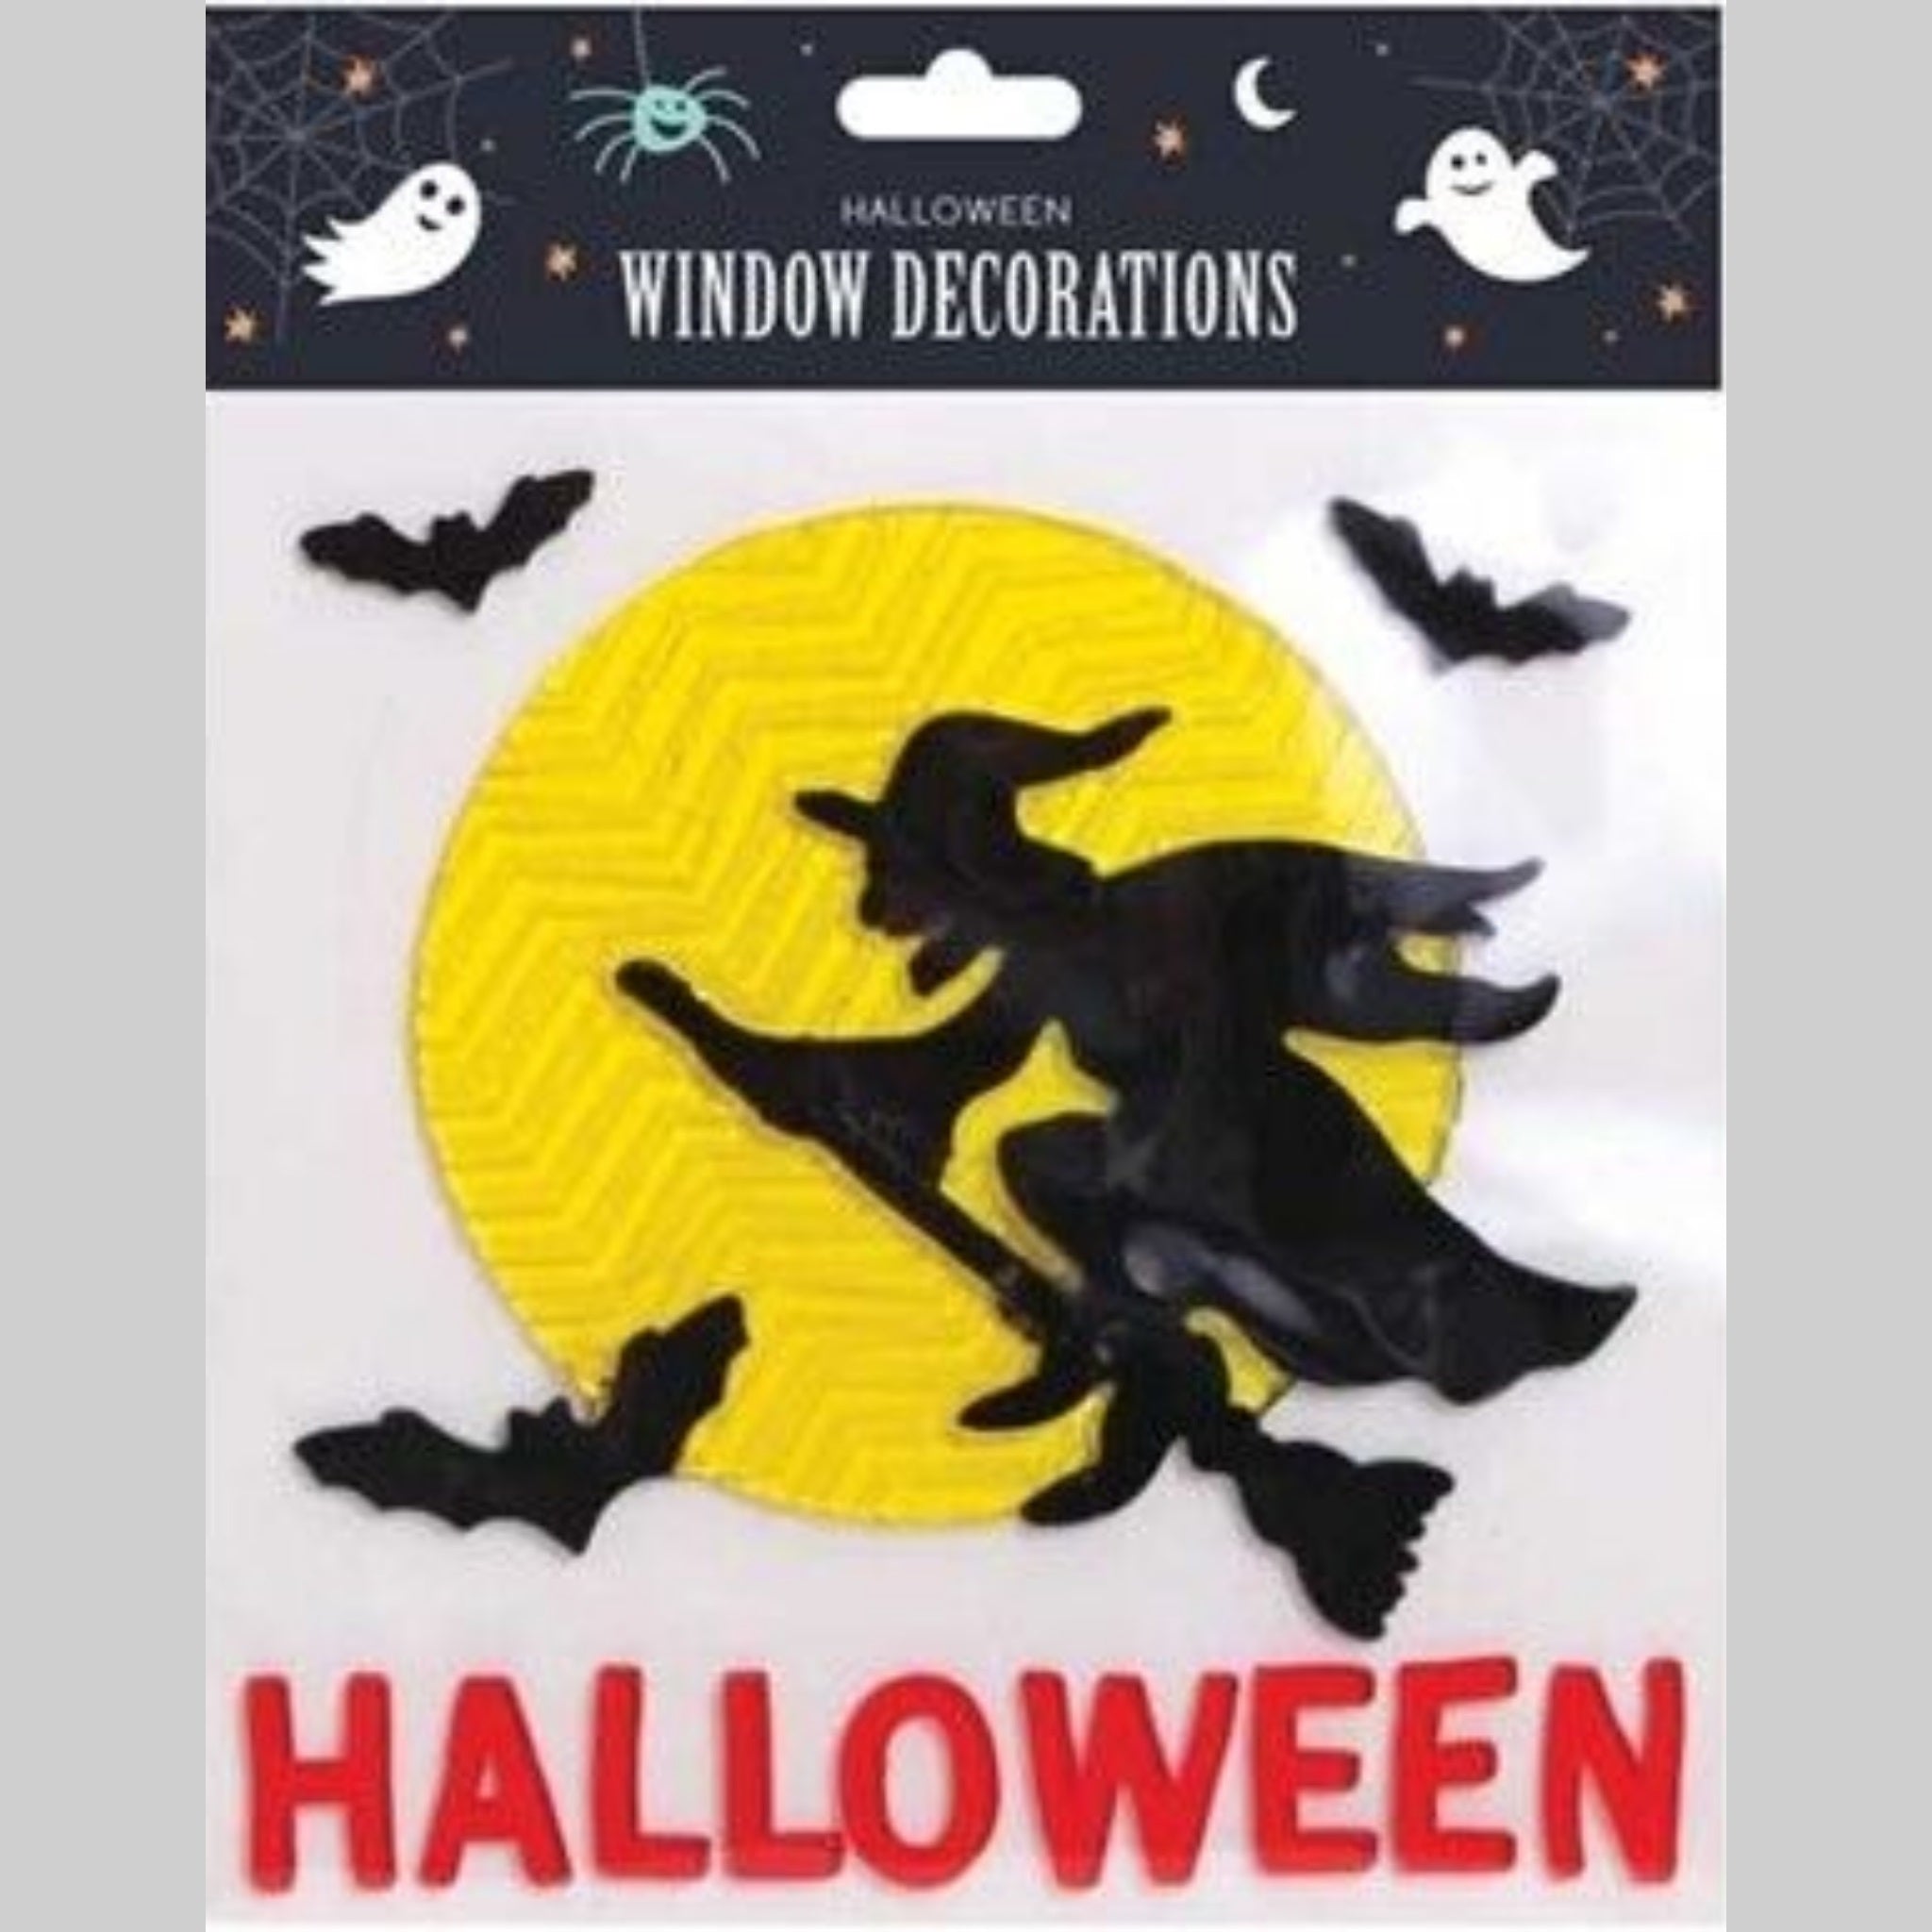 Beclen Harp Halloween Character Gel Clings Window Stickers Decoration/ Assorted Spooky Scary Trick or Treat House Party Decorations